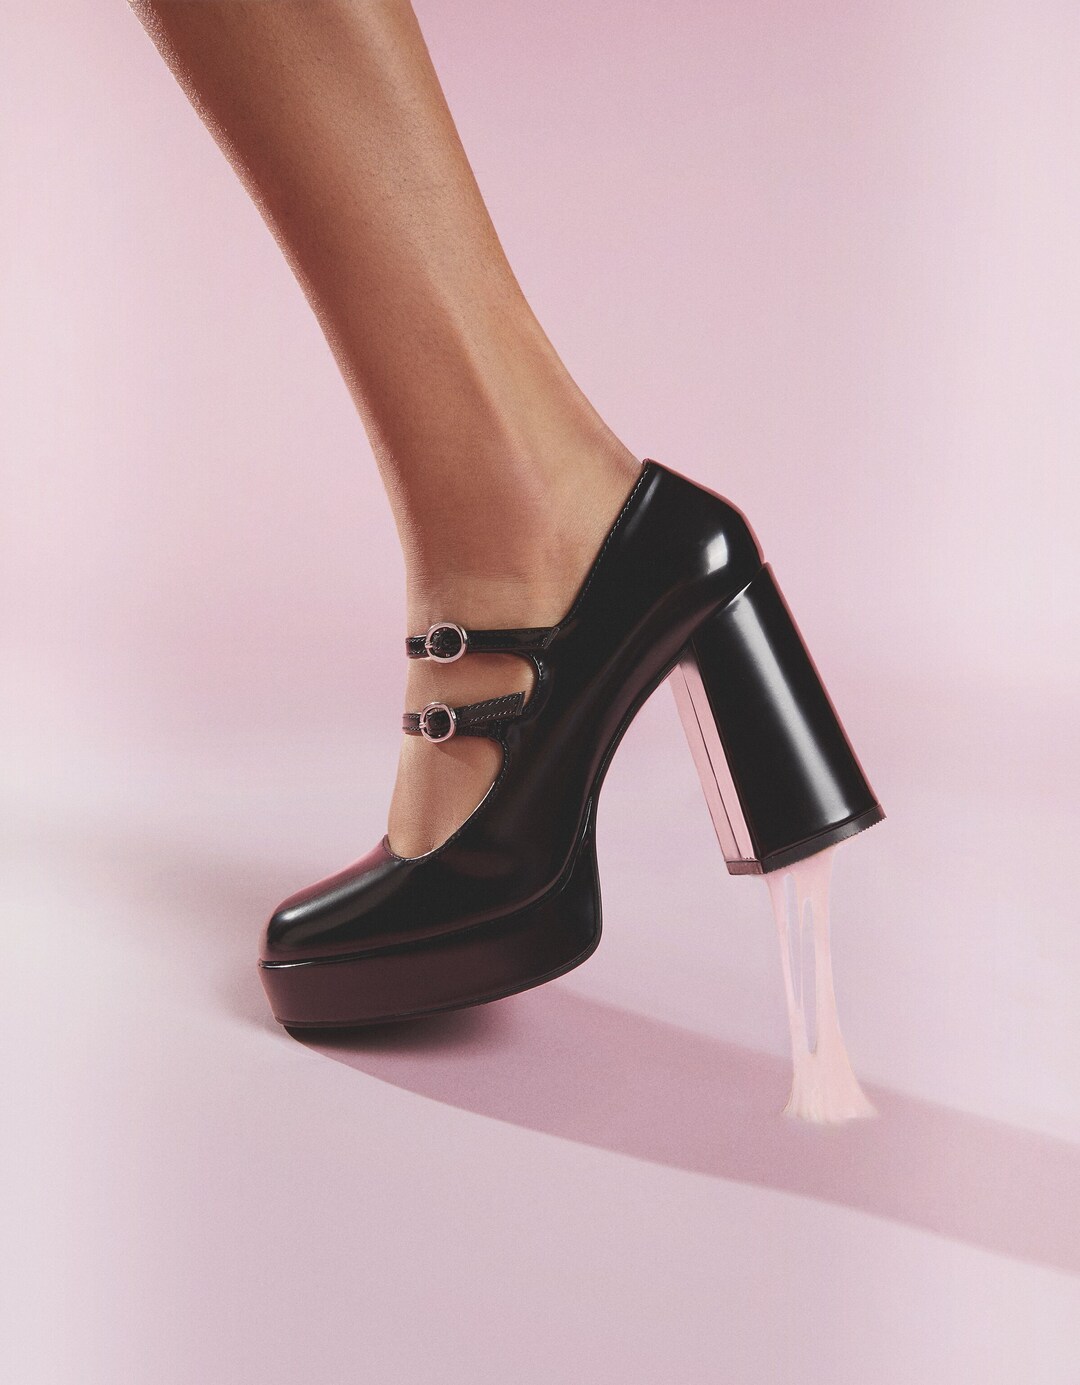 High-heel platform shoes with ankle strap